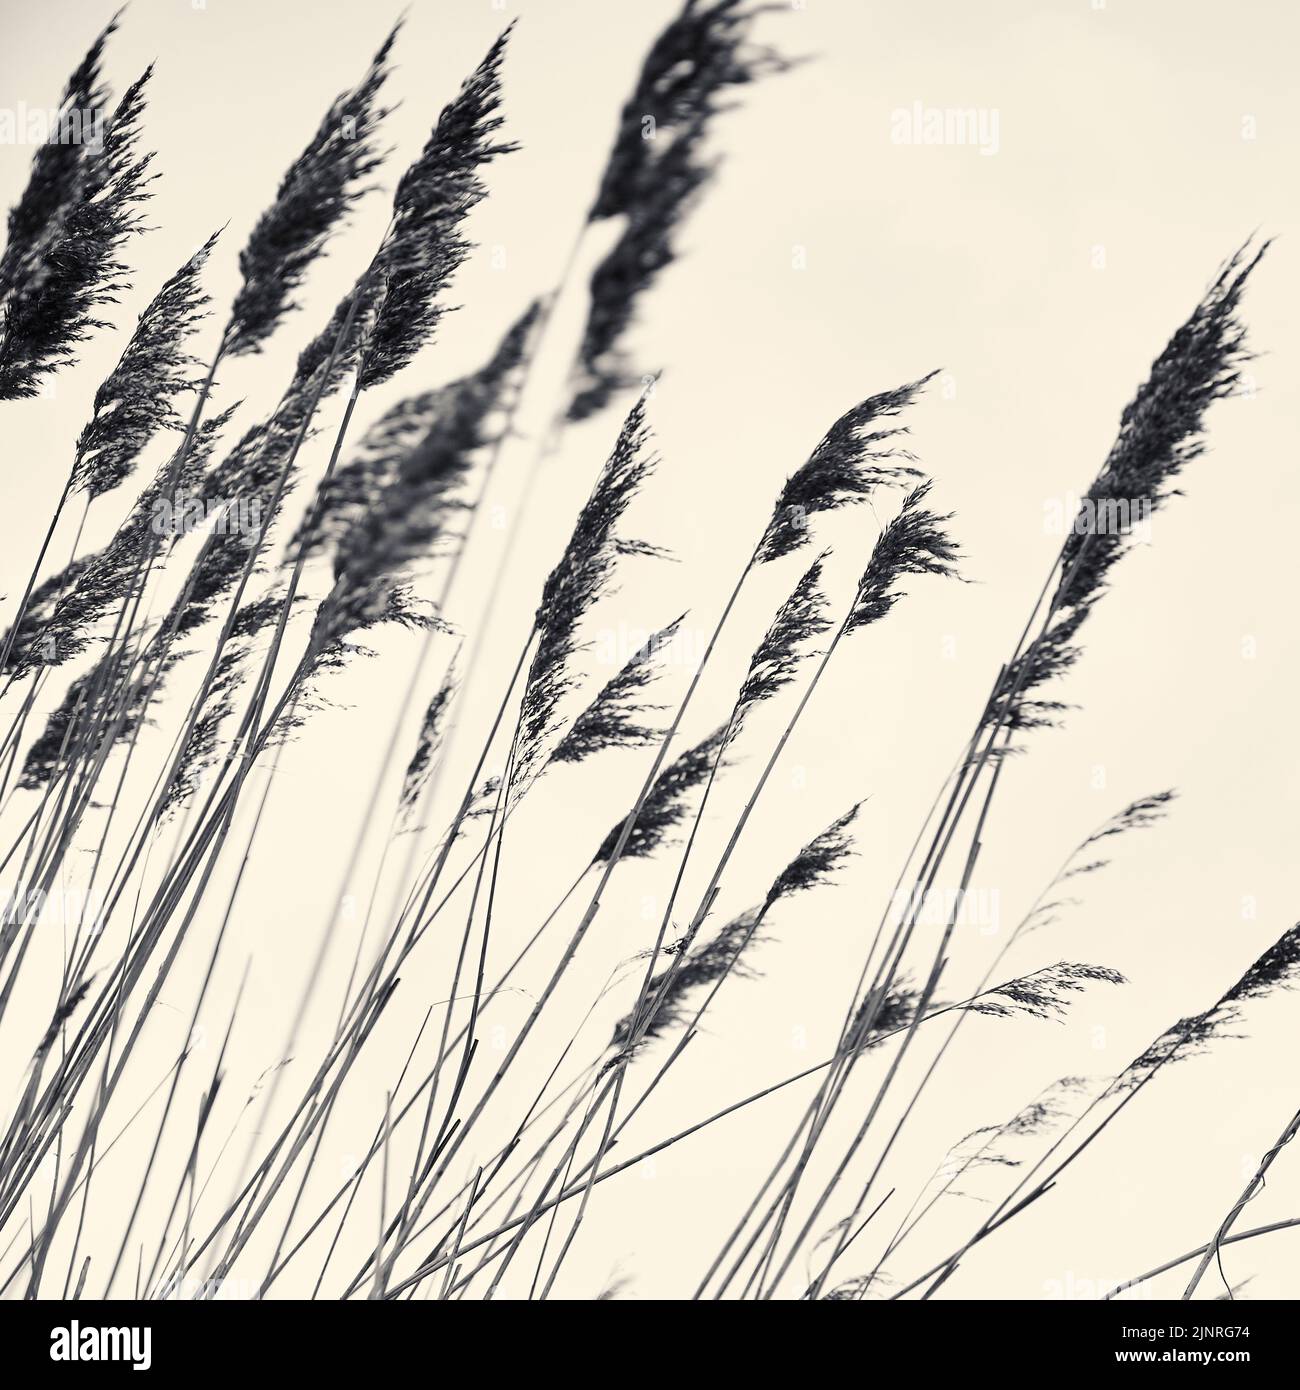 Pond reeds blowing in the wind Stock Photo